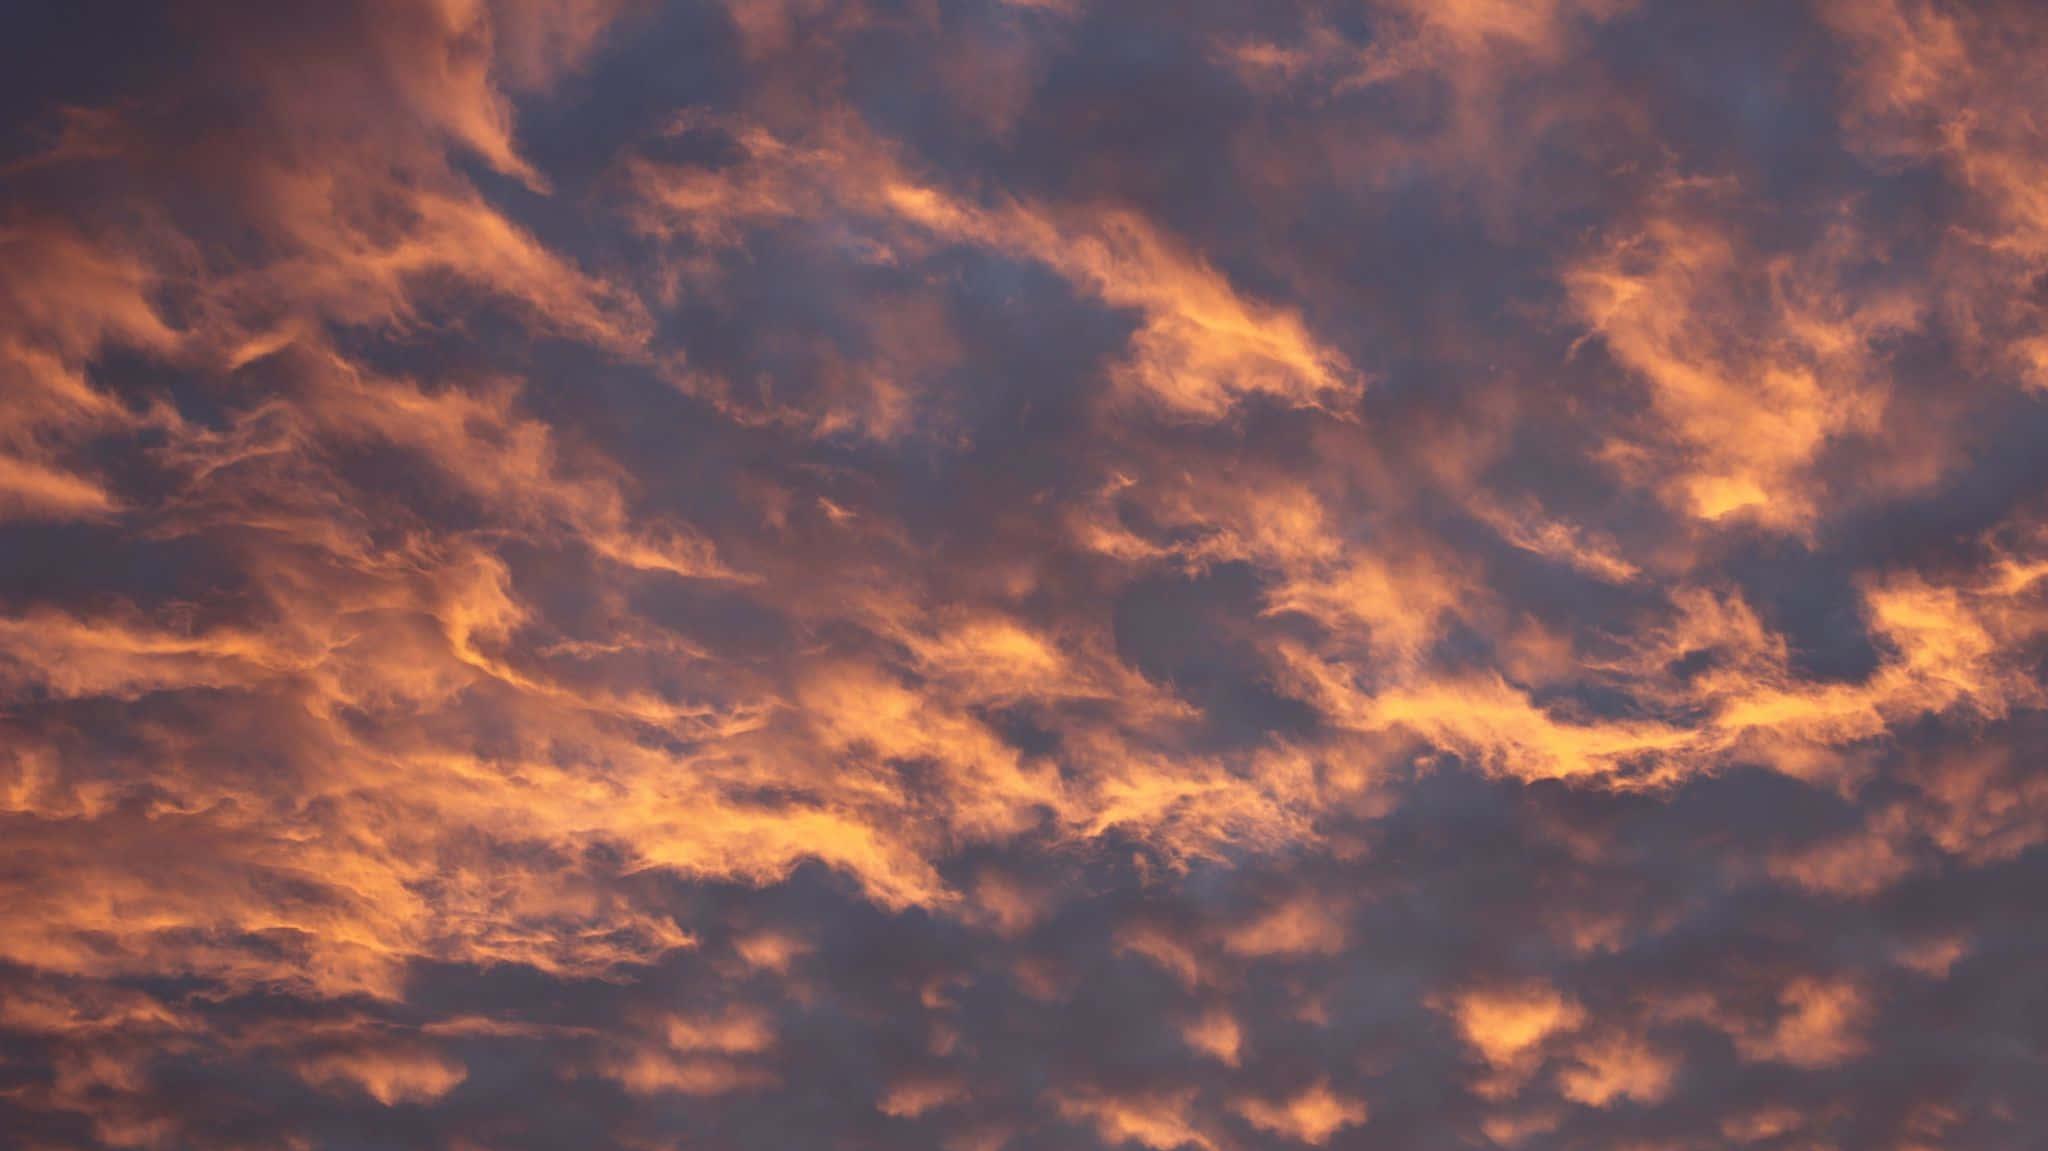 A Sunset With Clouds In The Sky Wallpaper